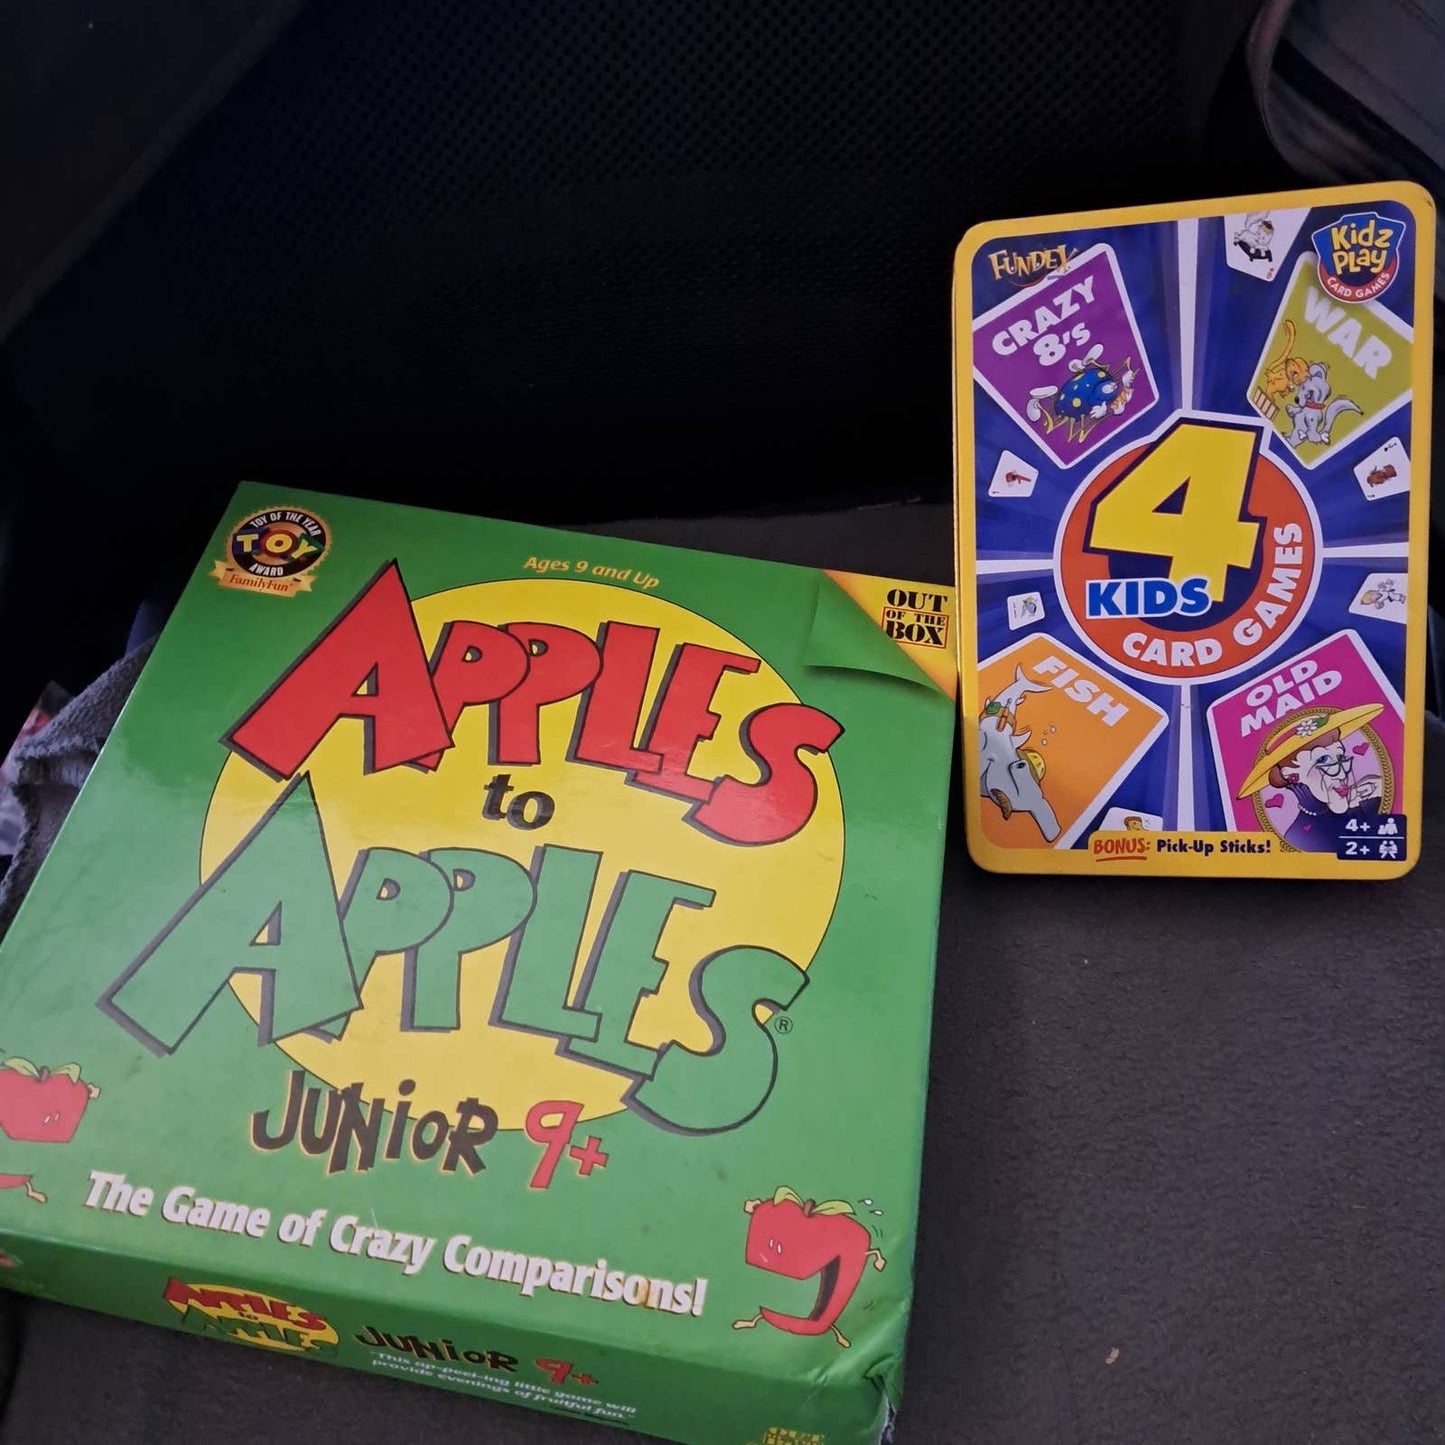 Rainy Day FUN! APPLES to APPLES JR & Tin with Card Games